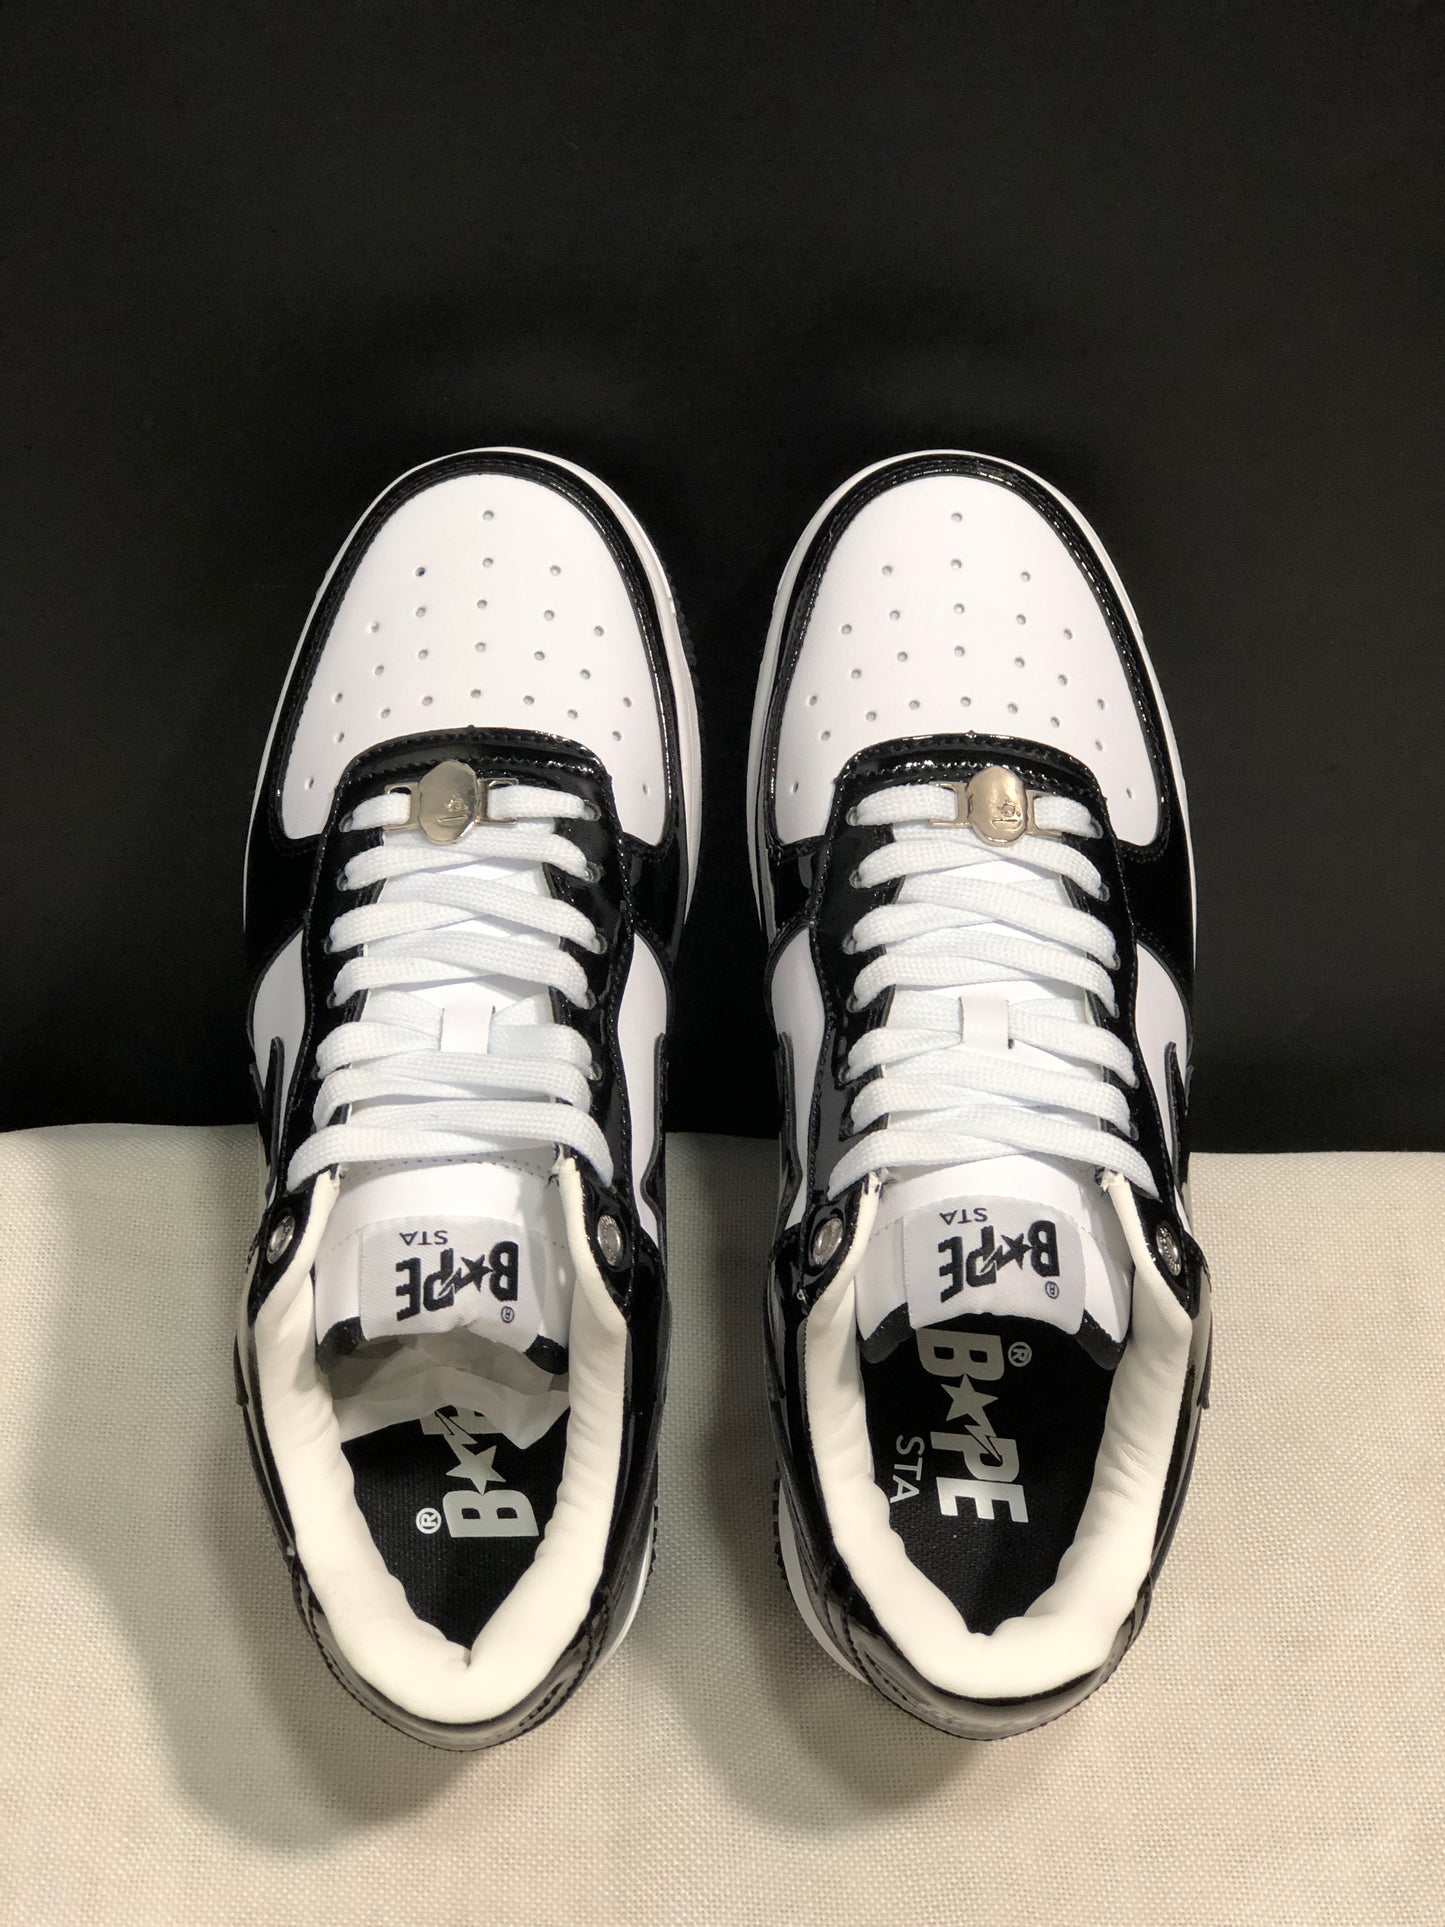 BAPE STA Low - Black and White Patent Leather